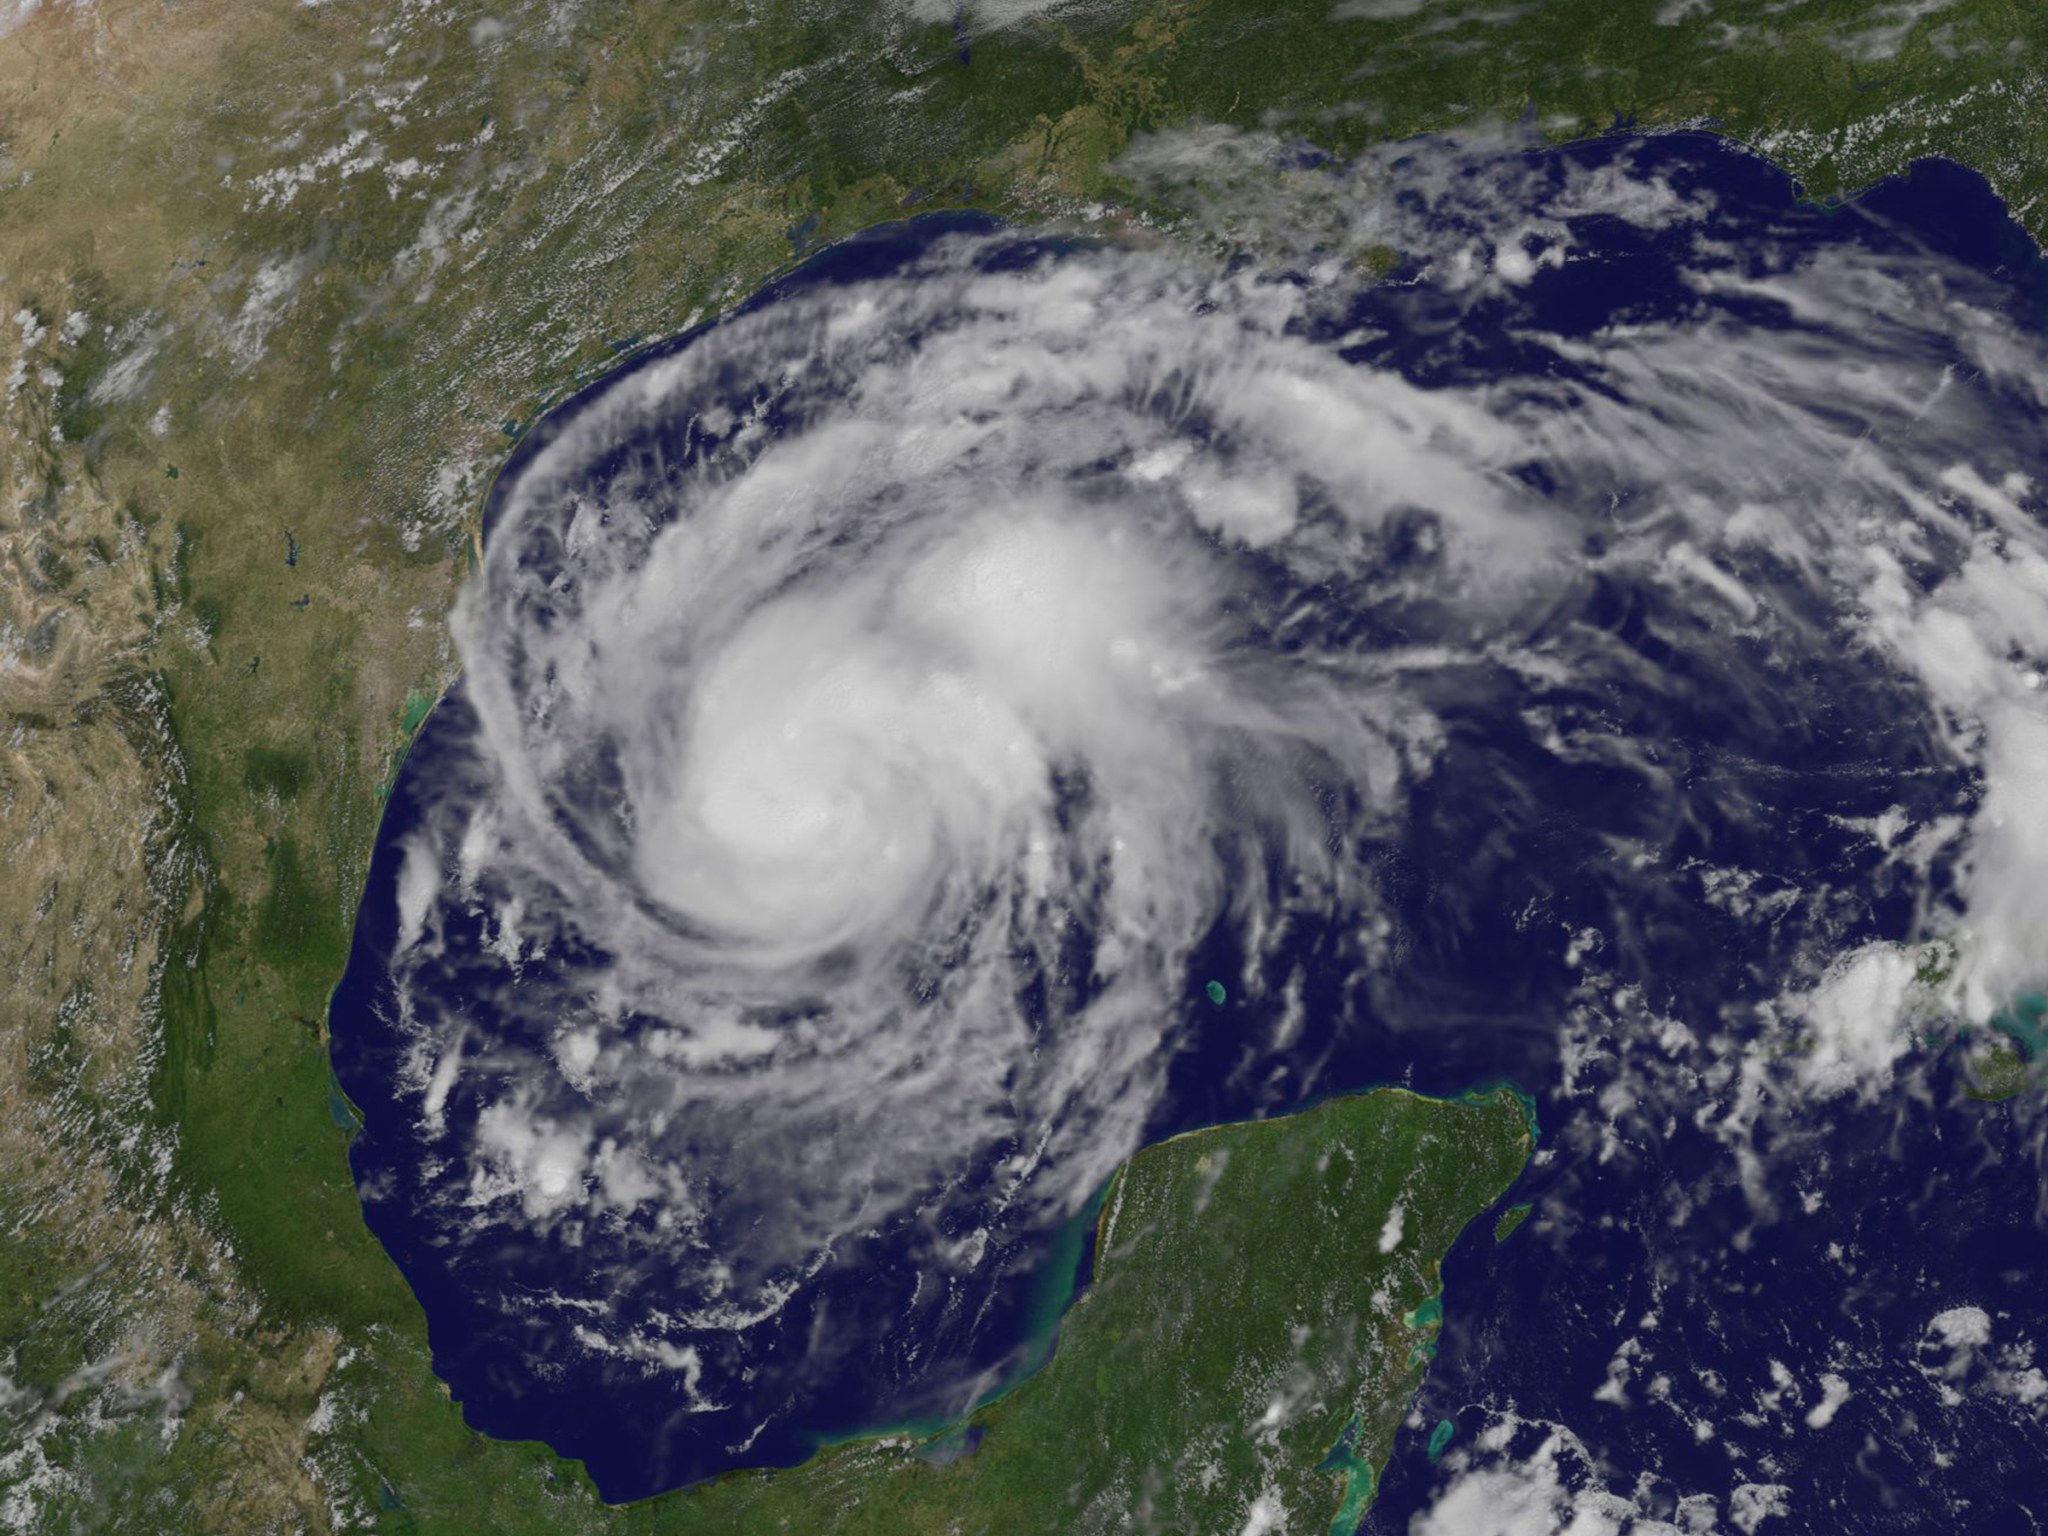 Satellite image of Harvey, a spiraling cloud mass over the Gulf of Mexico.